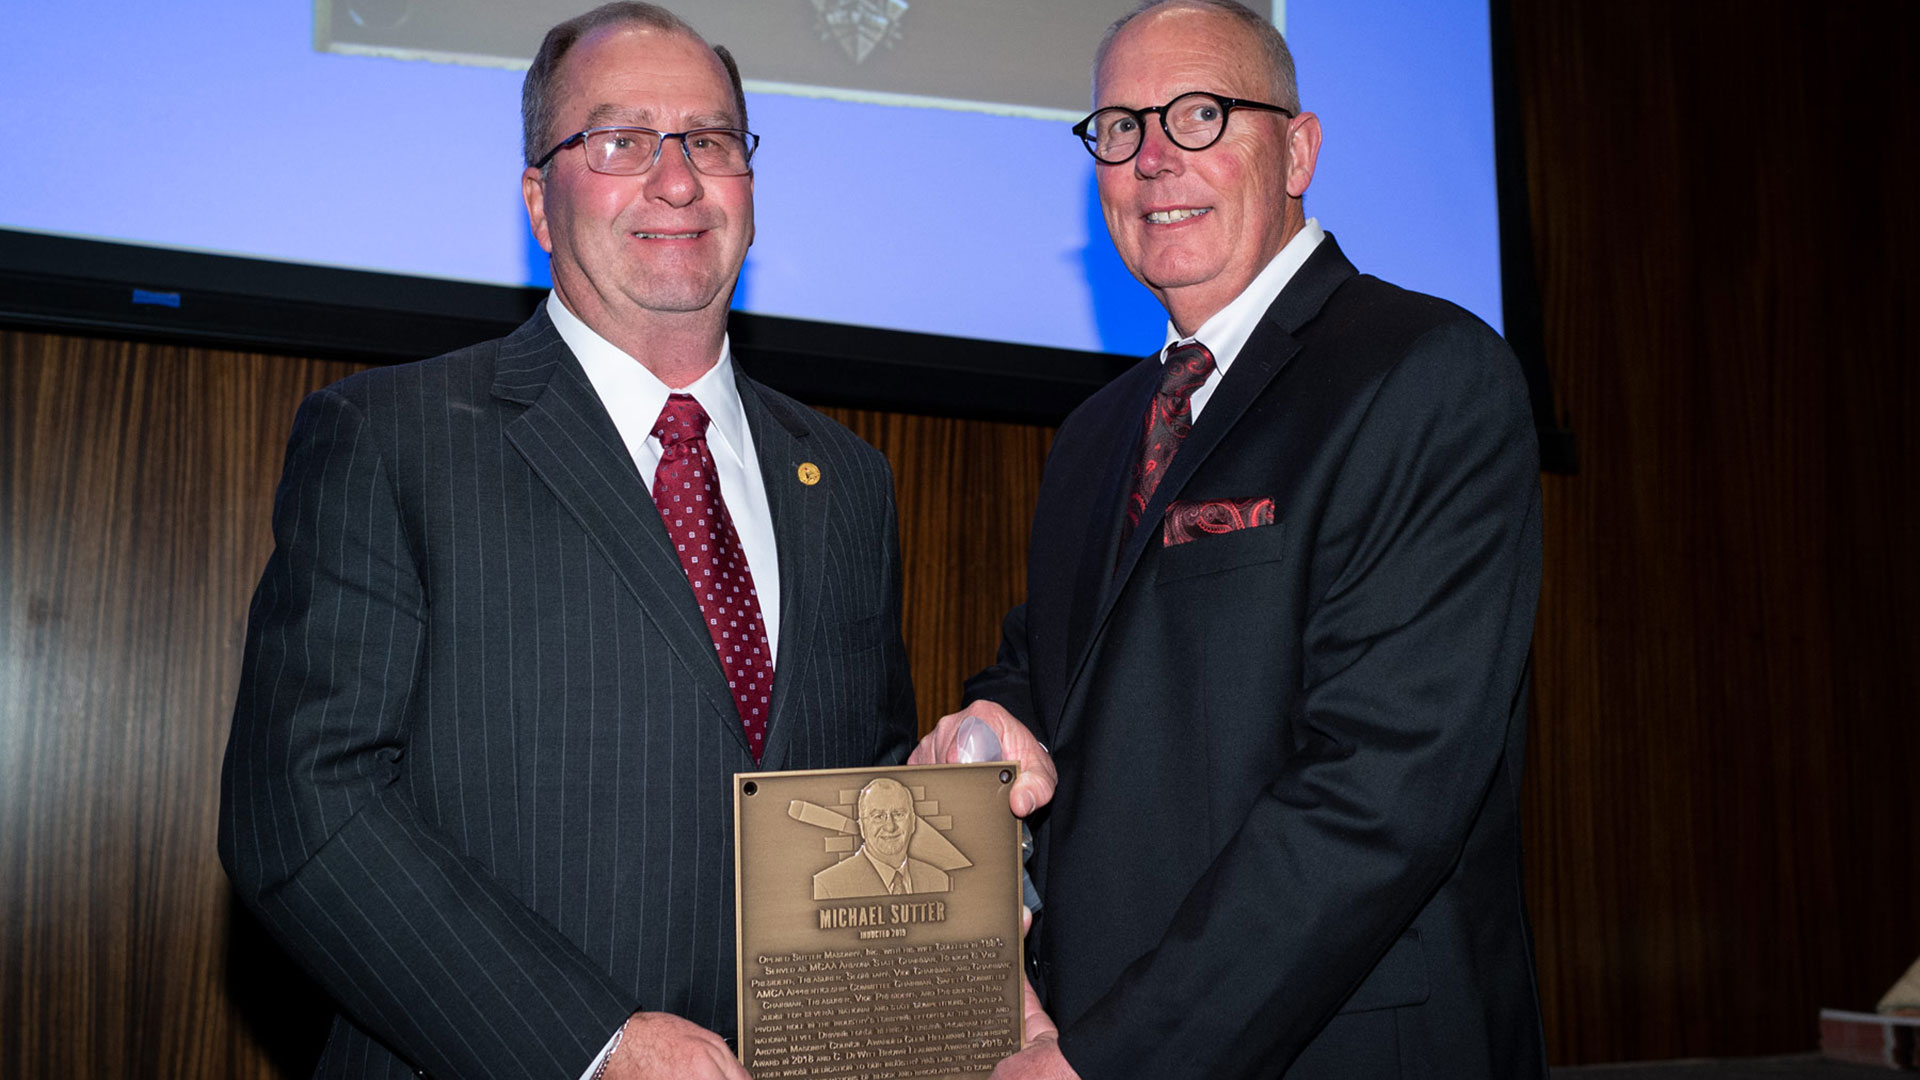 MCAA Chairman Paul Odom (right) presents Michael Sutter with his Masonry Hall of Fame plaque.